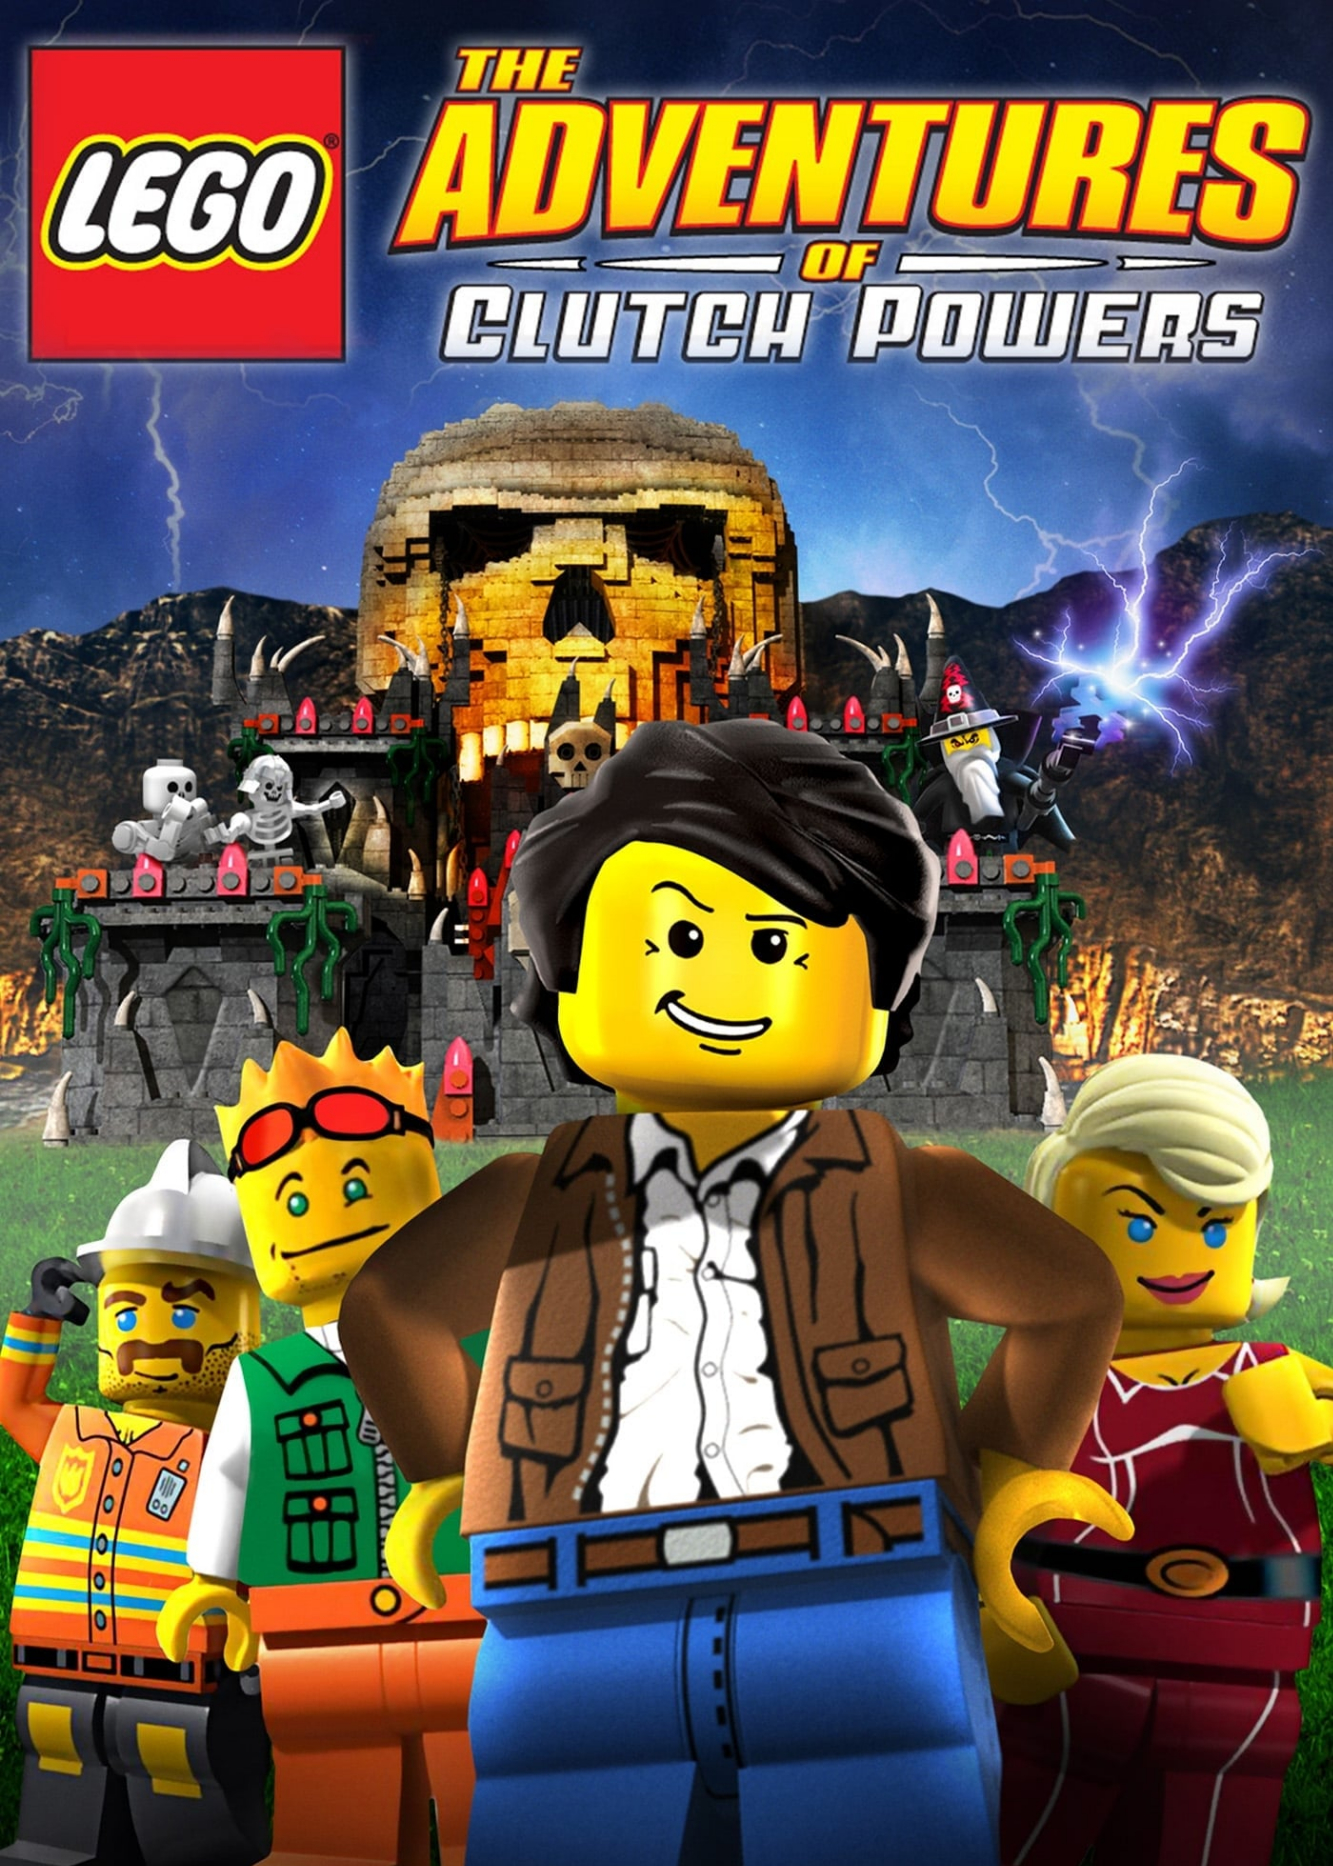 Poster Phim Lego: The Adventures of Clutch Powers (Lego: The Adventures of Clutch Powers)